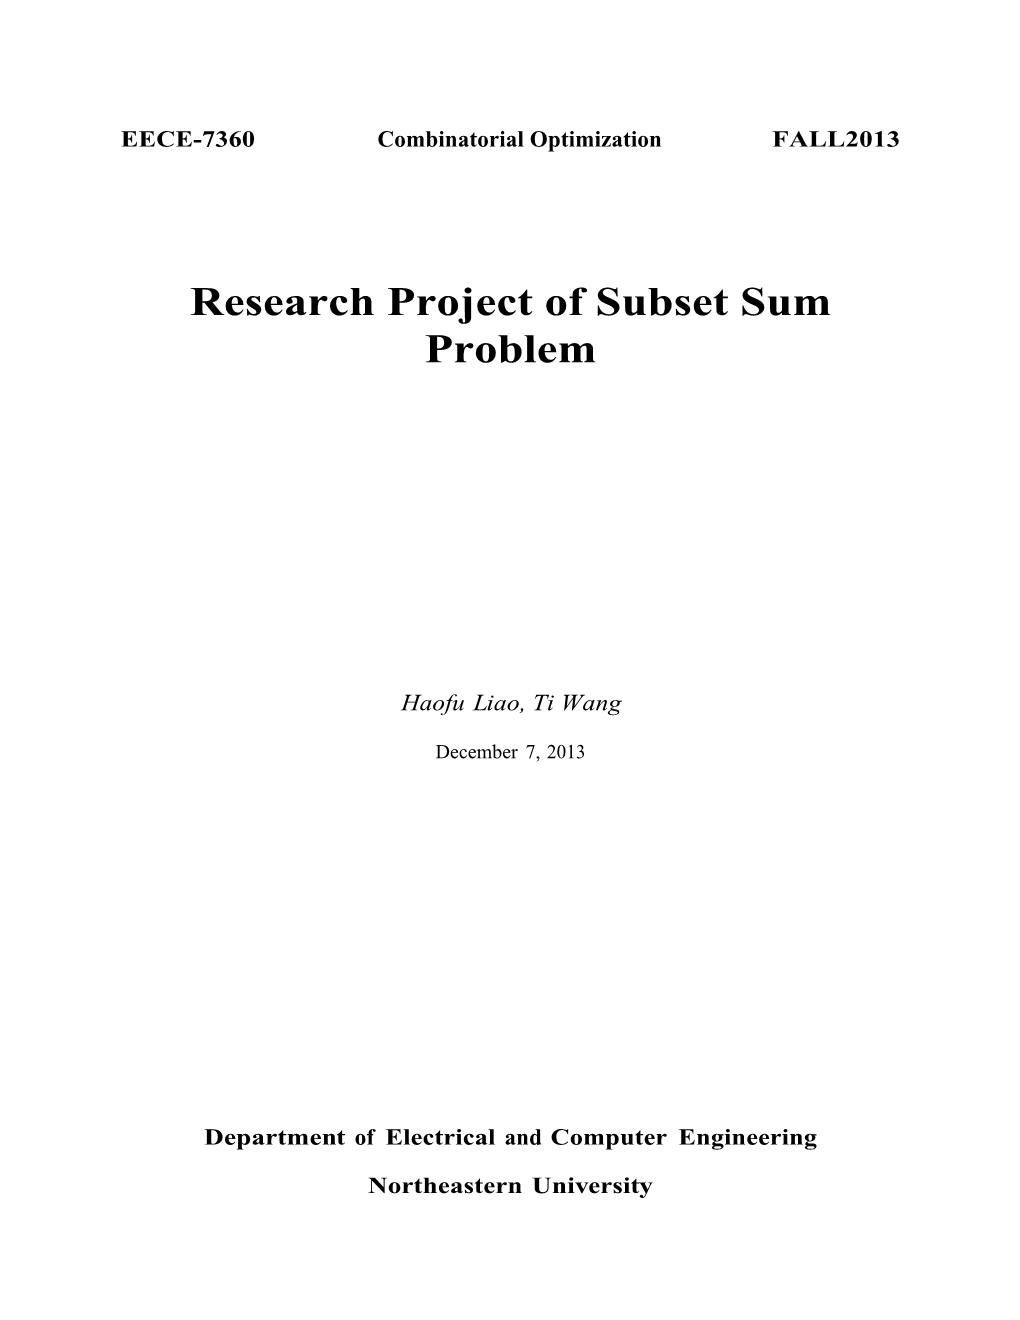 Research Project of Subset Sum Problem